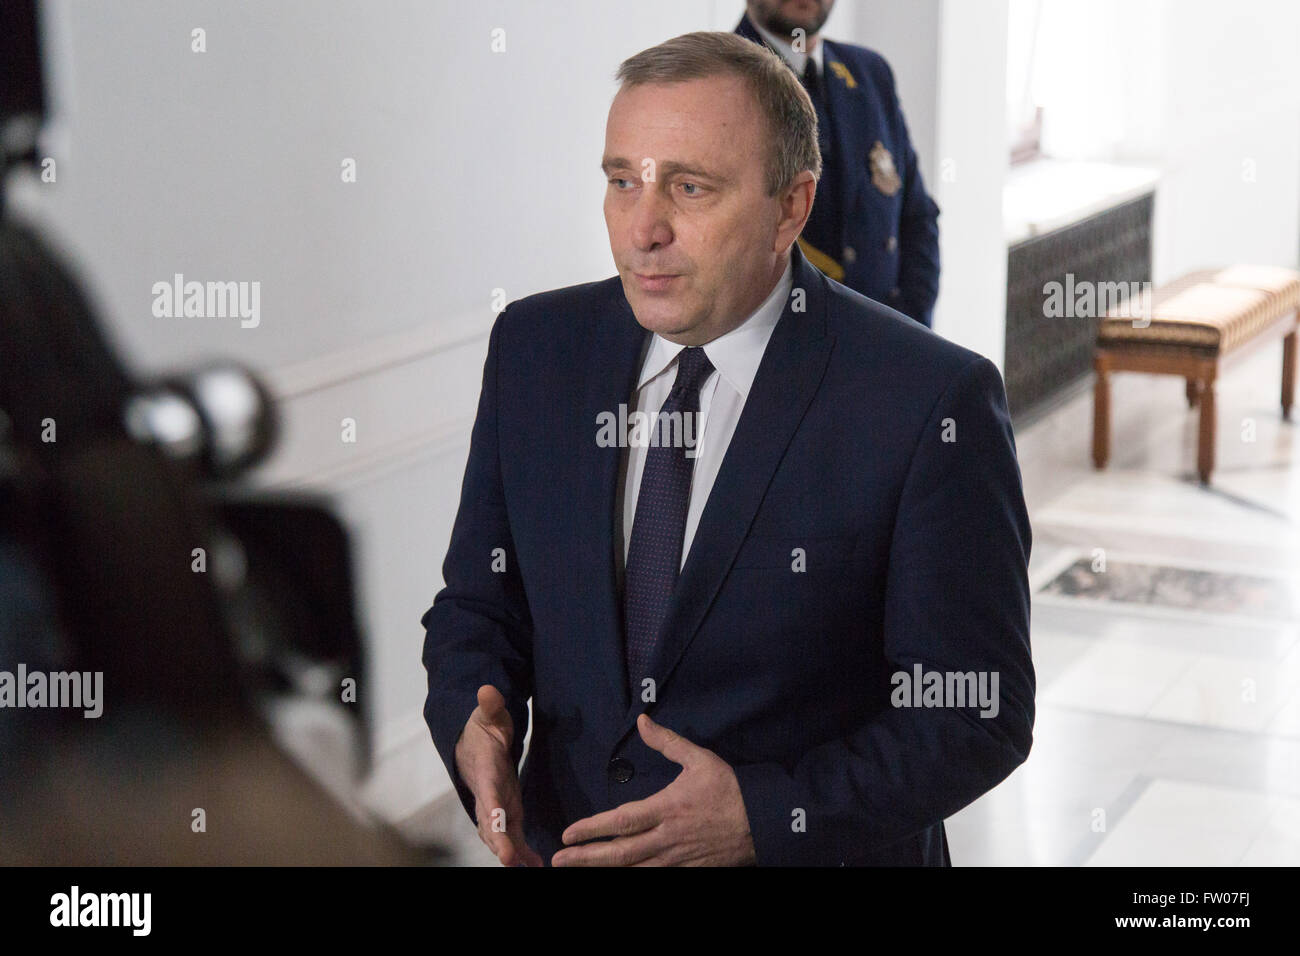 Warsaw, Poland. 31st Mar, 2016. Leader of Civic Platform party (PO), Grzegorz Schetyna before meeting of leaders of eight polish political parties in a bid to resolve Poland's constitutional crisis. © Mateusz Wlodarczyk/Pacific Press/Alamy Live News Stock Photo